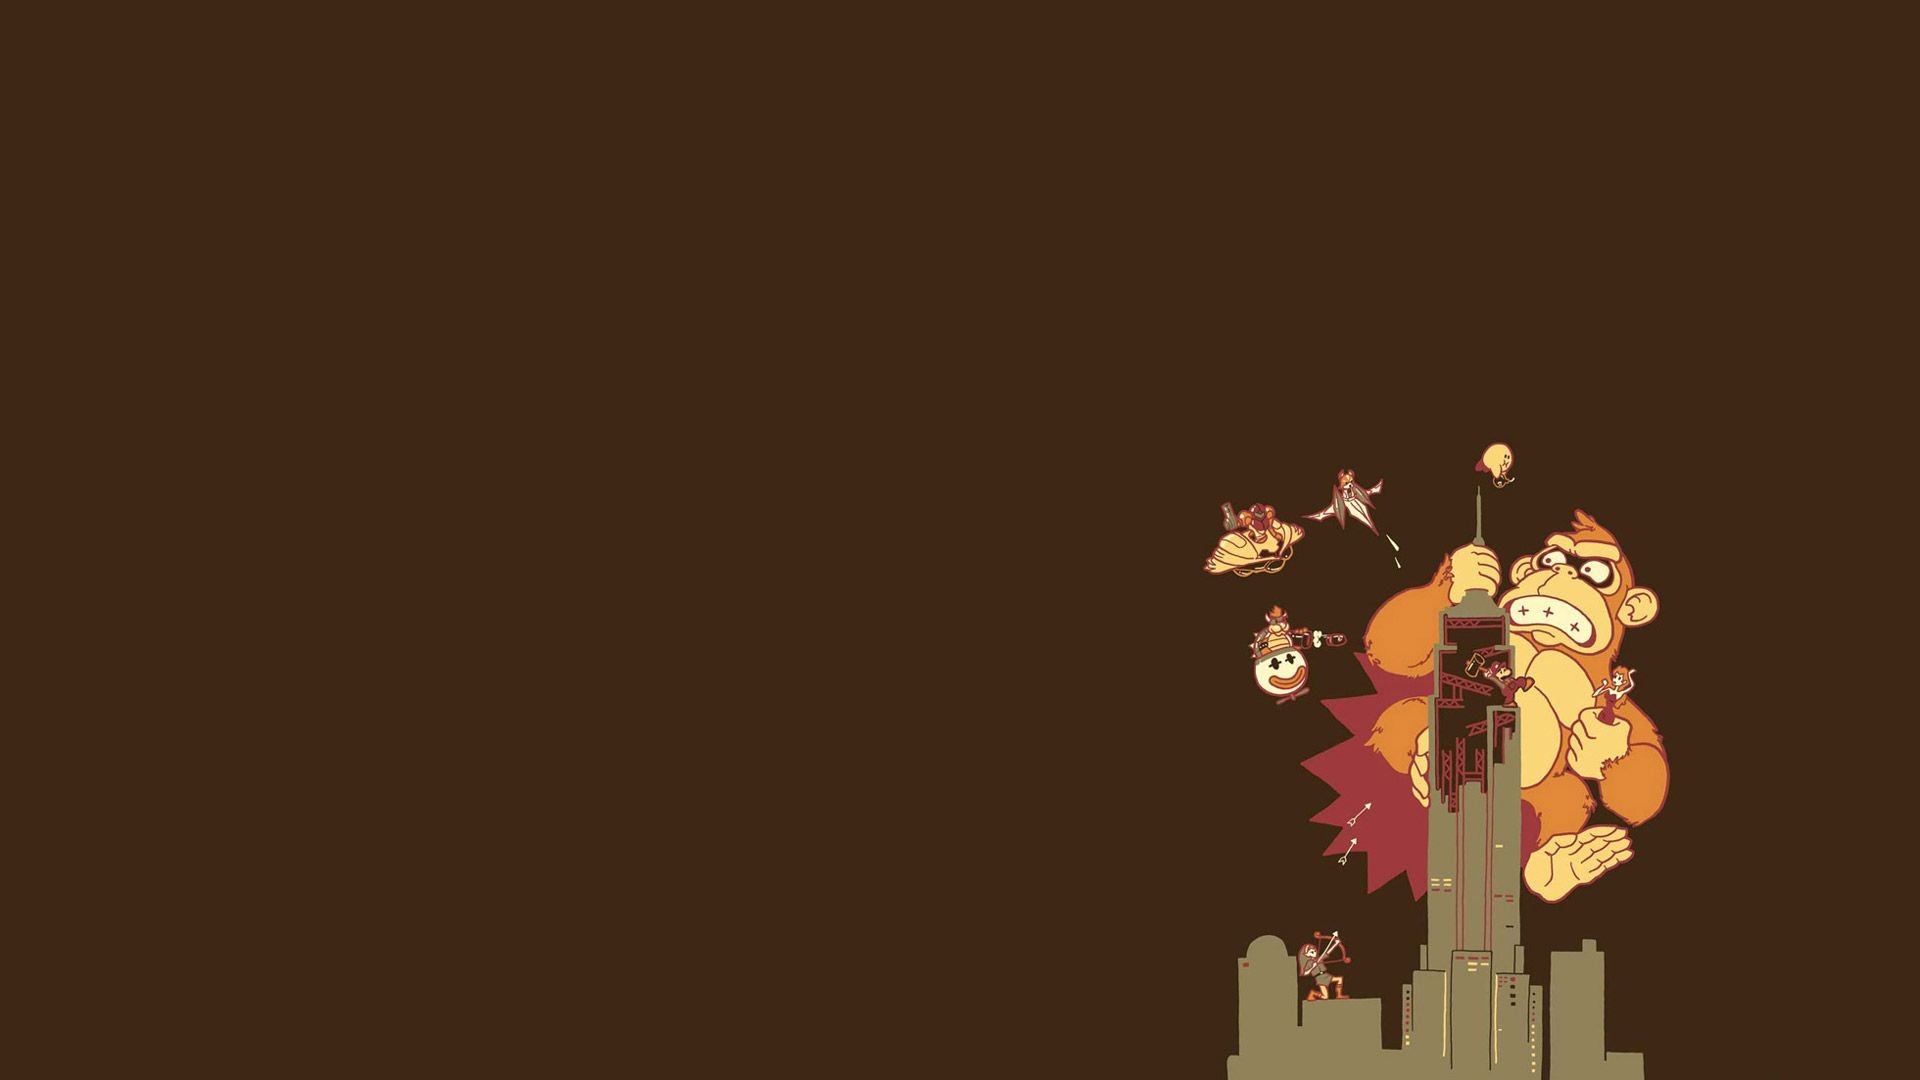 1920x1080 Donkey Kong Wallpaper and Backgrounds | Desktop and Large Images